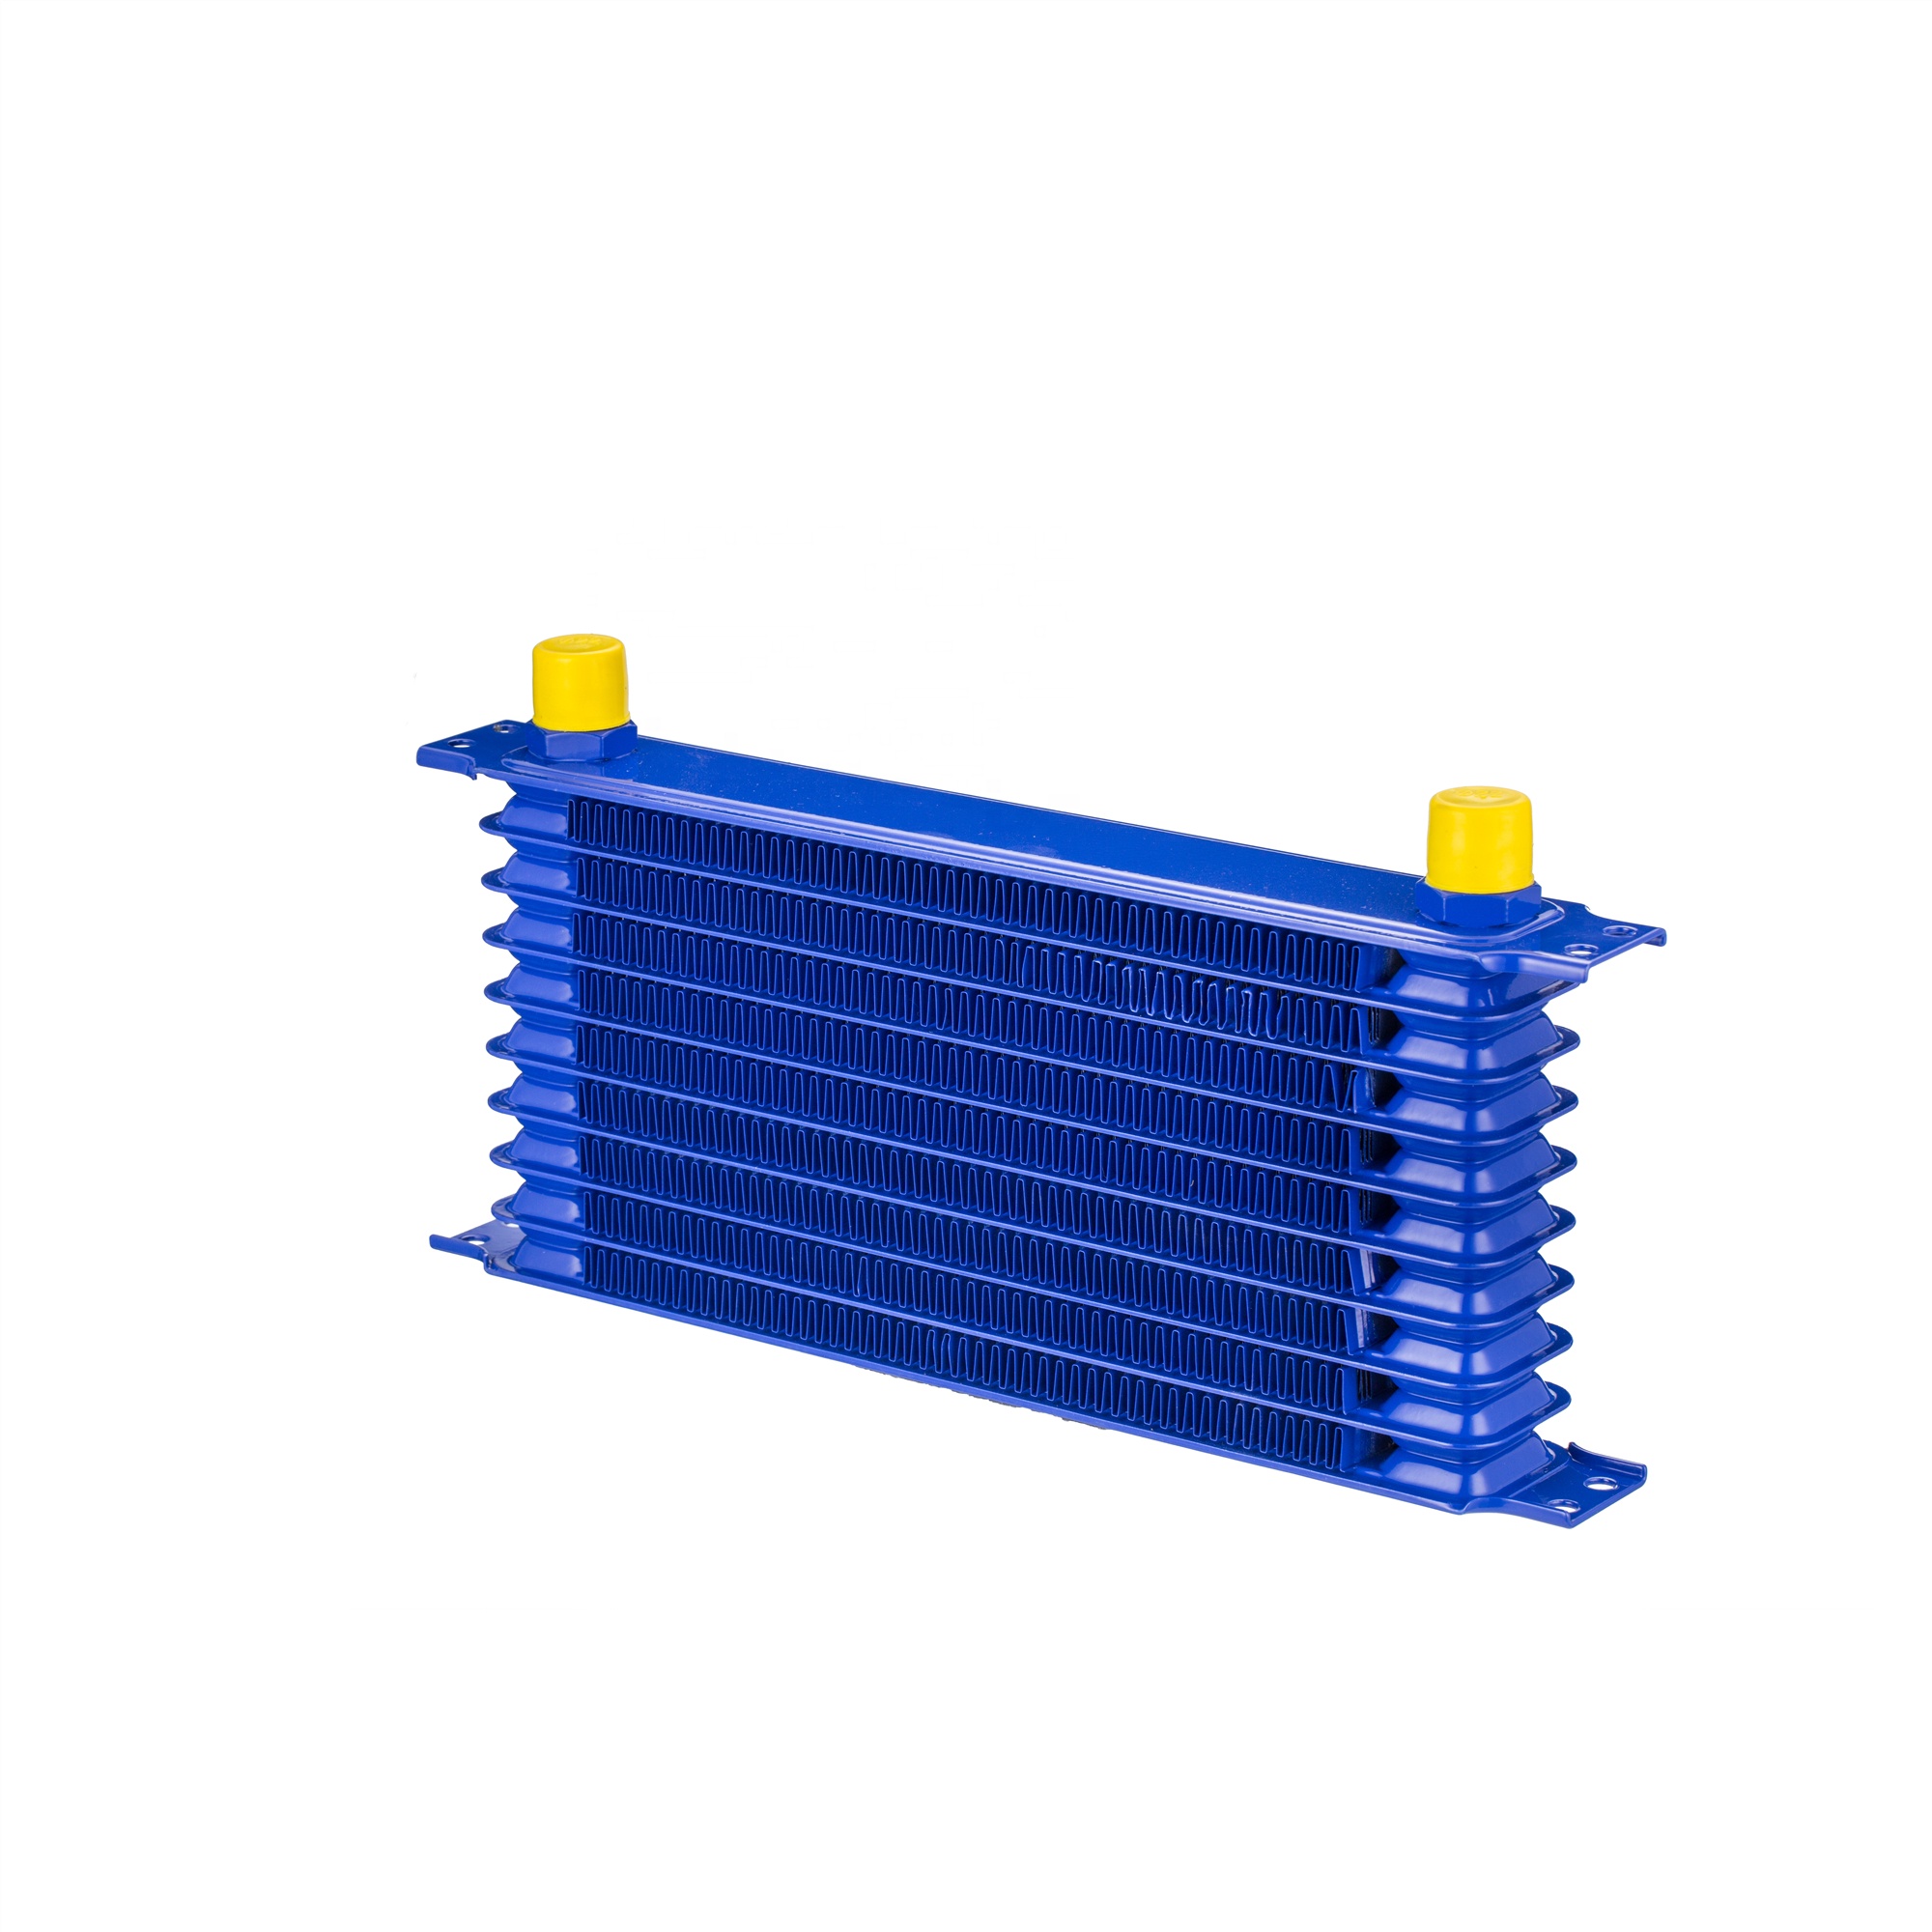 High definition 16 Row Oil Cooler - HaoFa Universal Japanese AN10 Inlet 10 Row Aluminum Transmission or Engine Oil Cooler – Blue – HaoFa